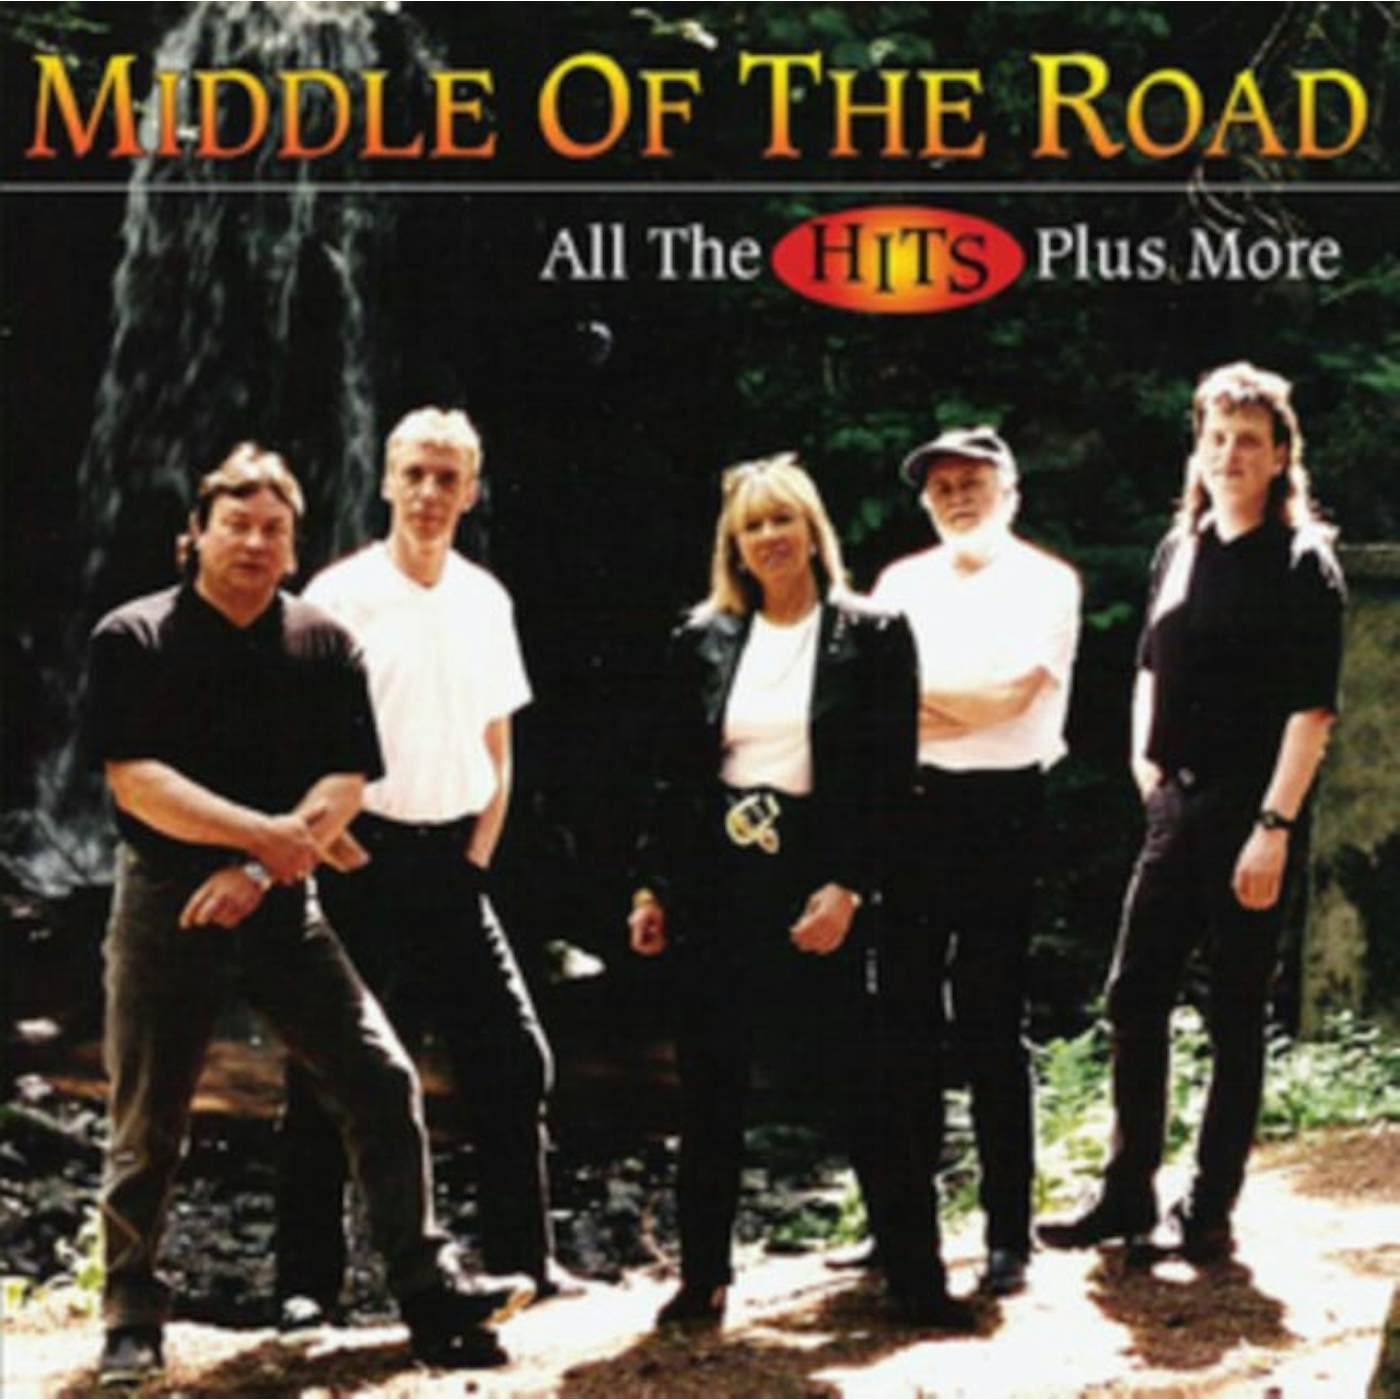 Middle Of The Road CD - All The Hits Plus More